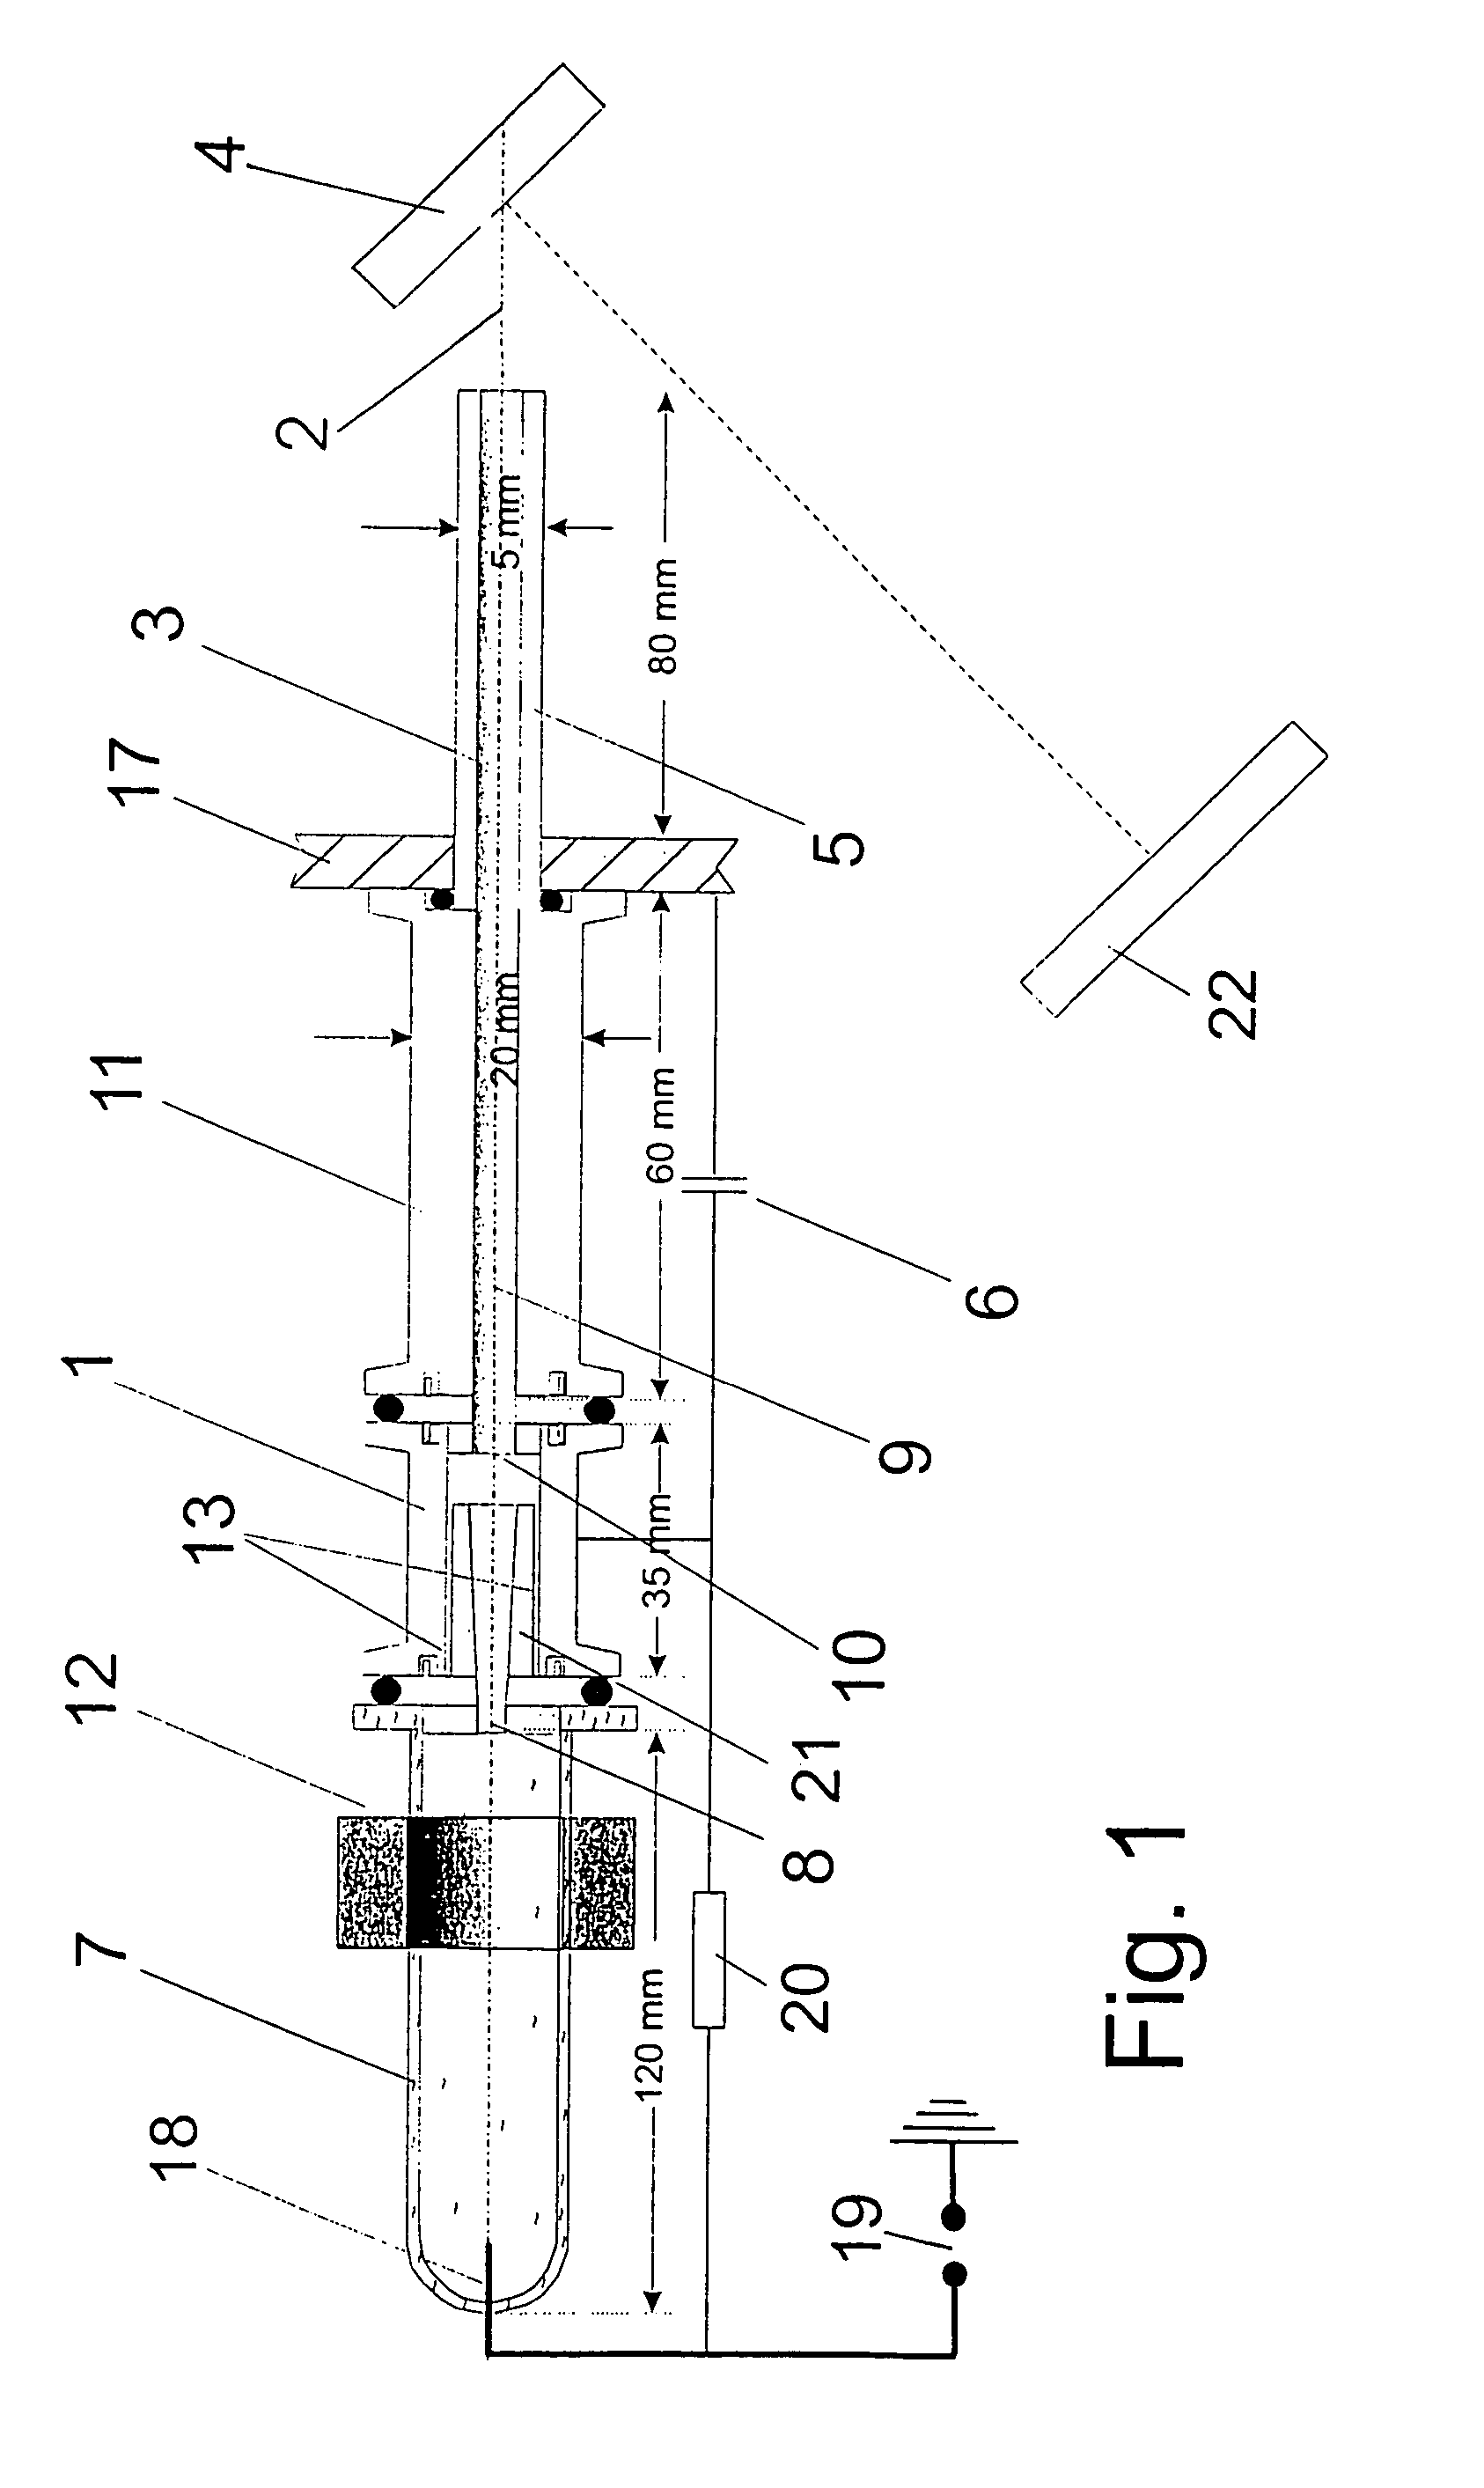 Channel spark source for generating a stable focused electron beam